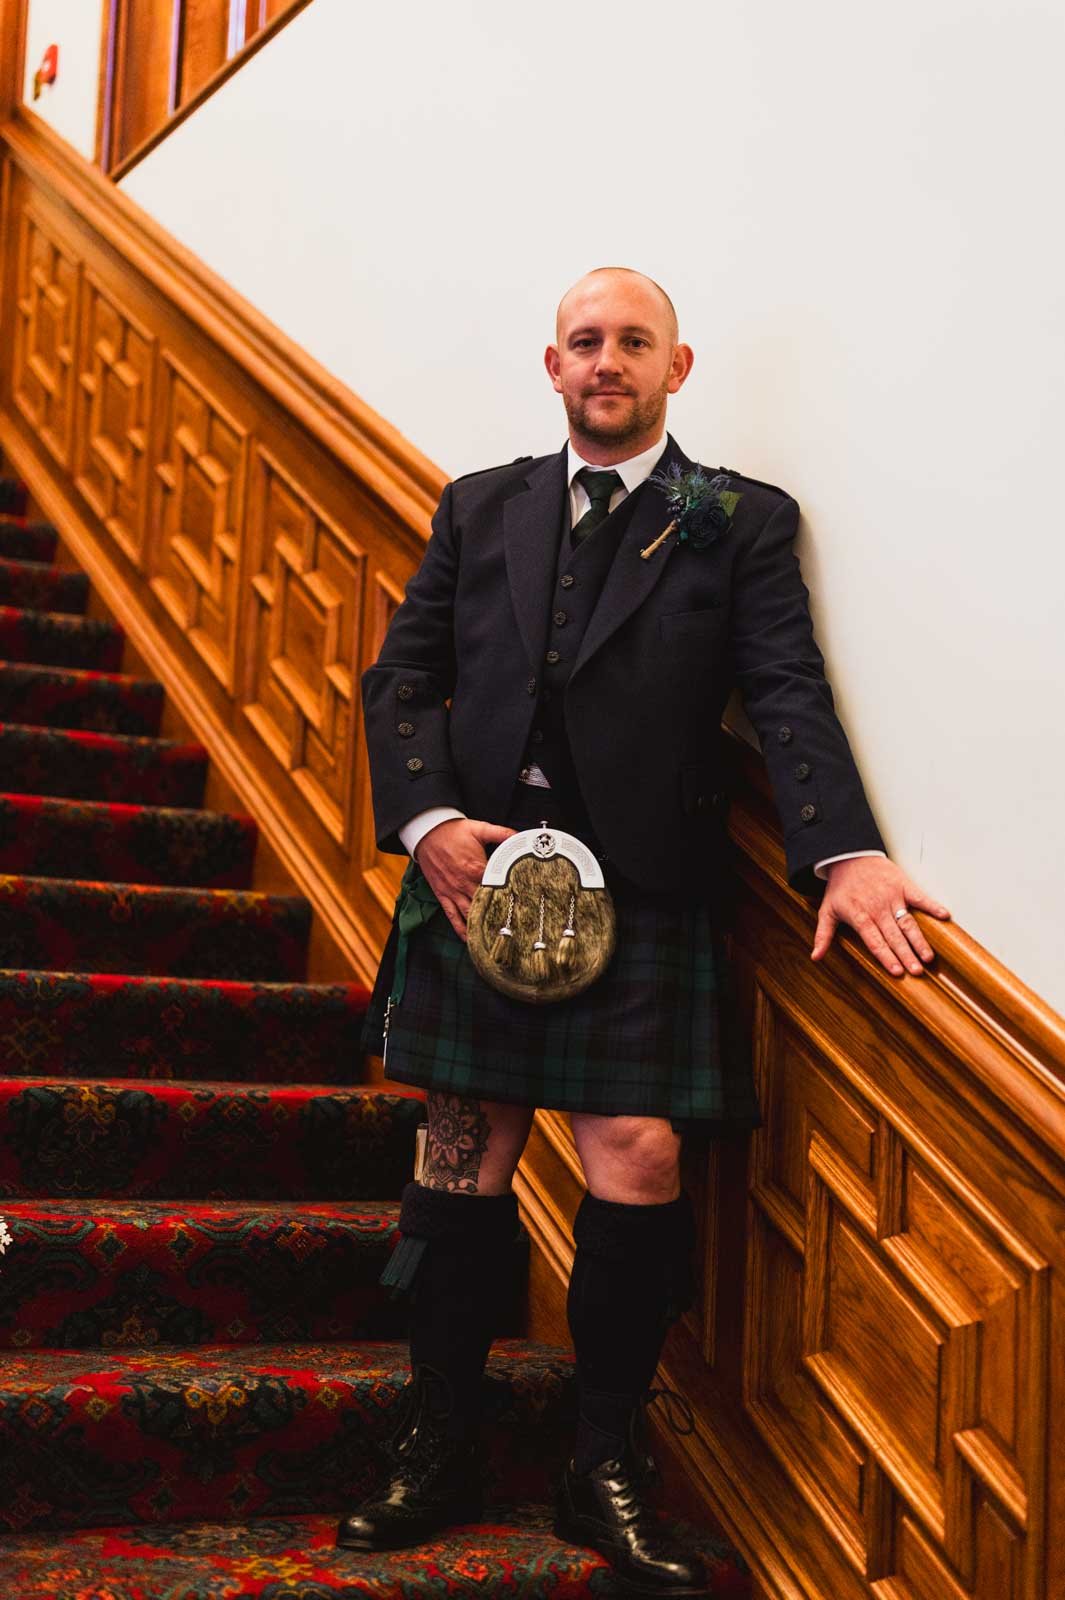  Grooms showing off Scottish wedding attire standing on the stairs with one hand on the railing. 